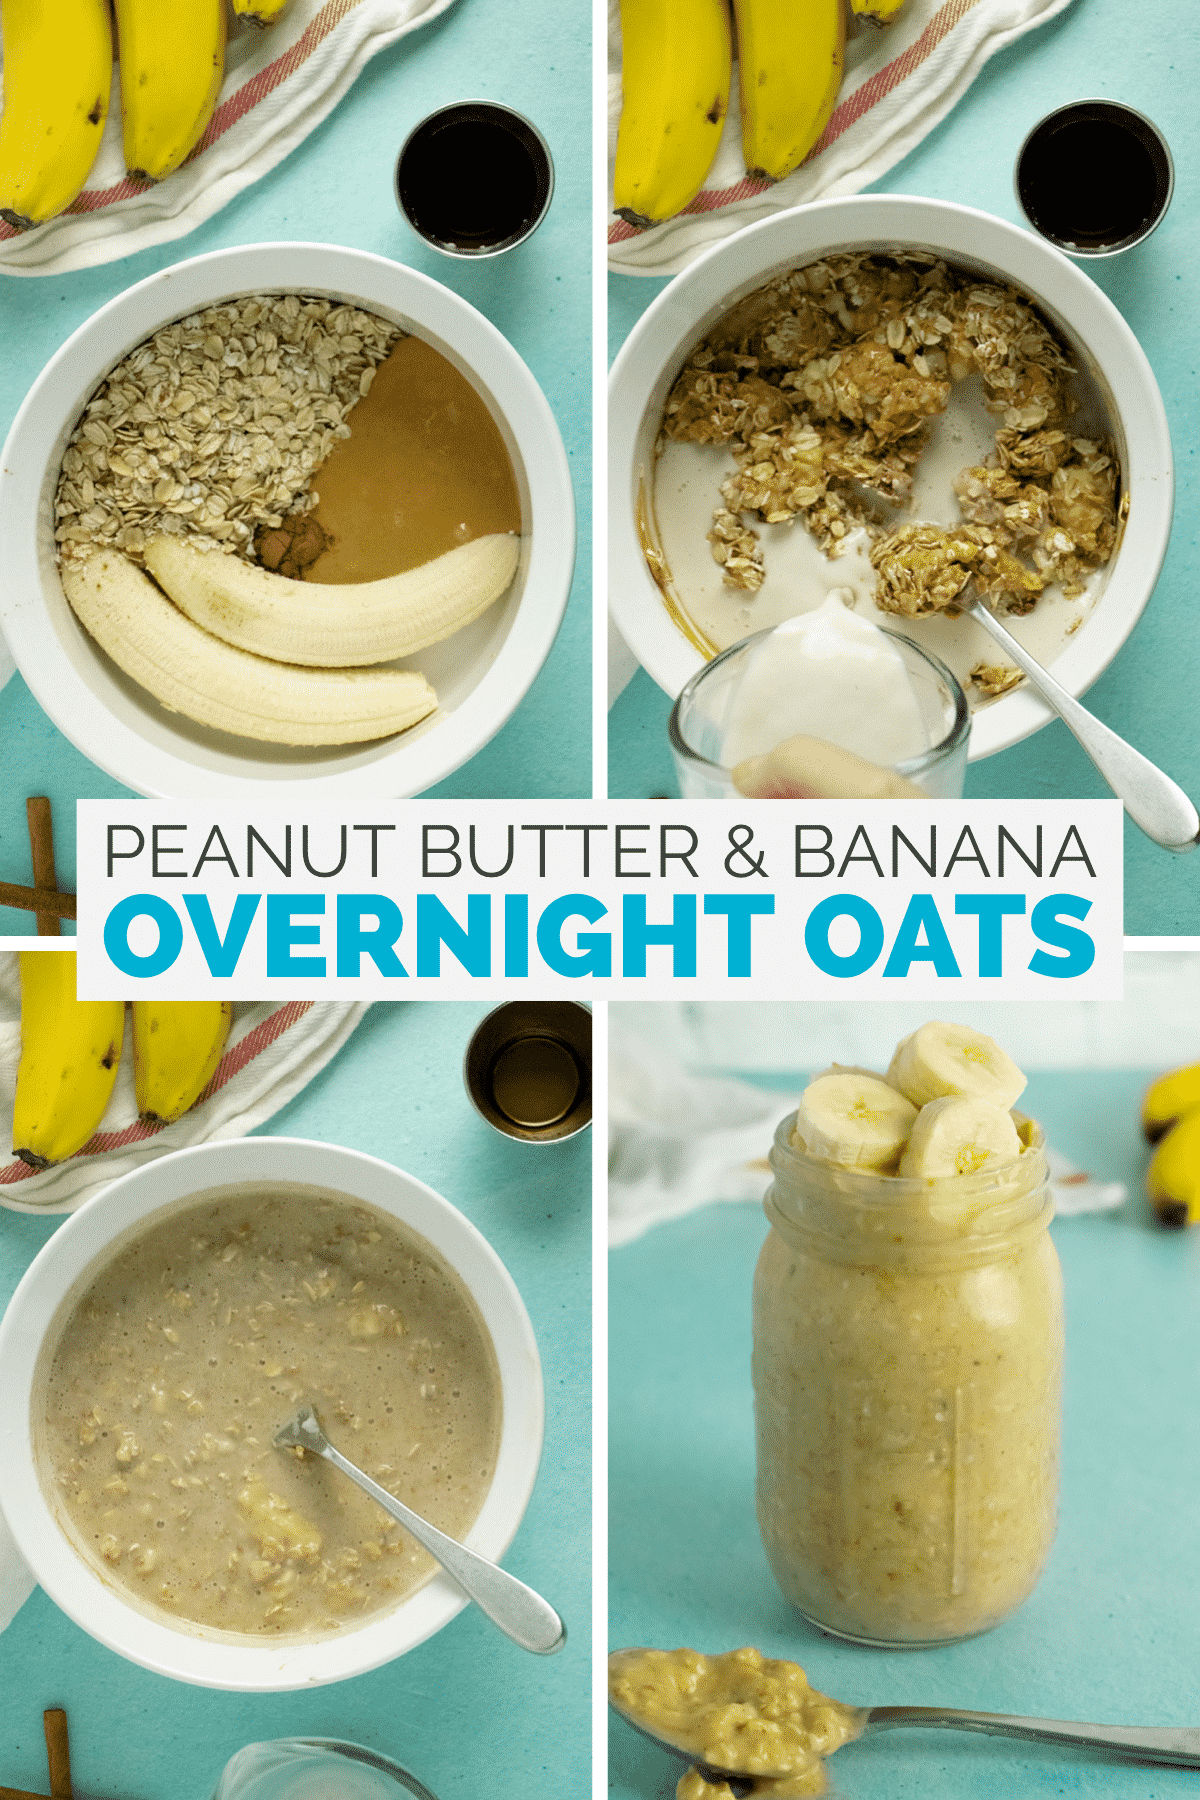 image collage of making peanut butter and banana overnight oats - text overlay